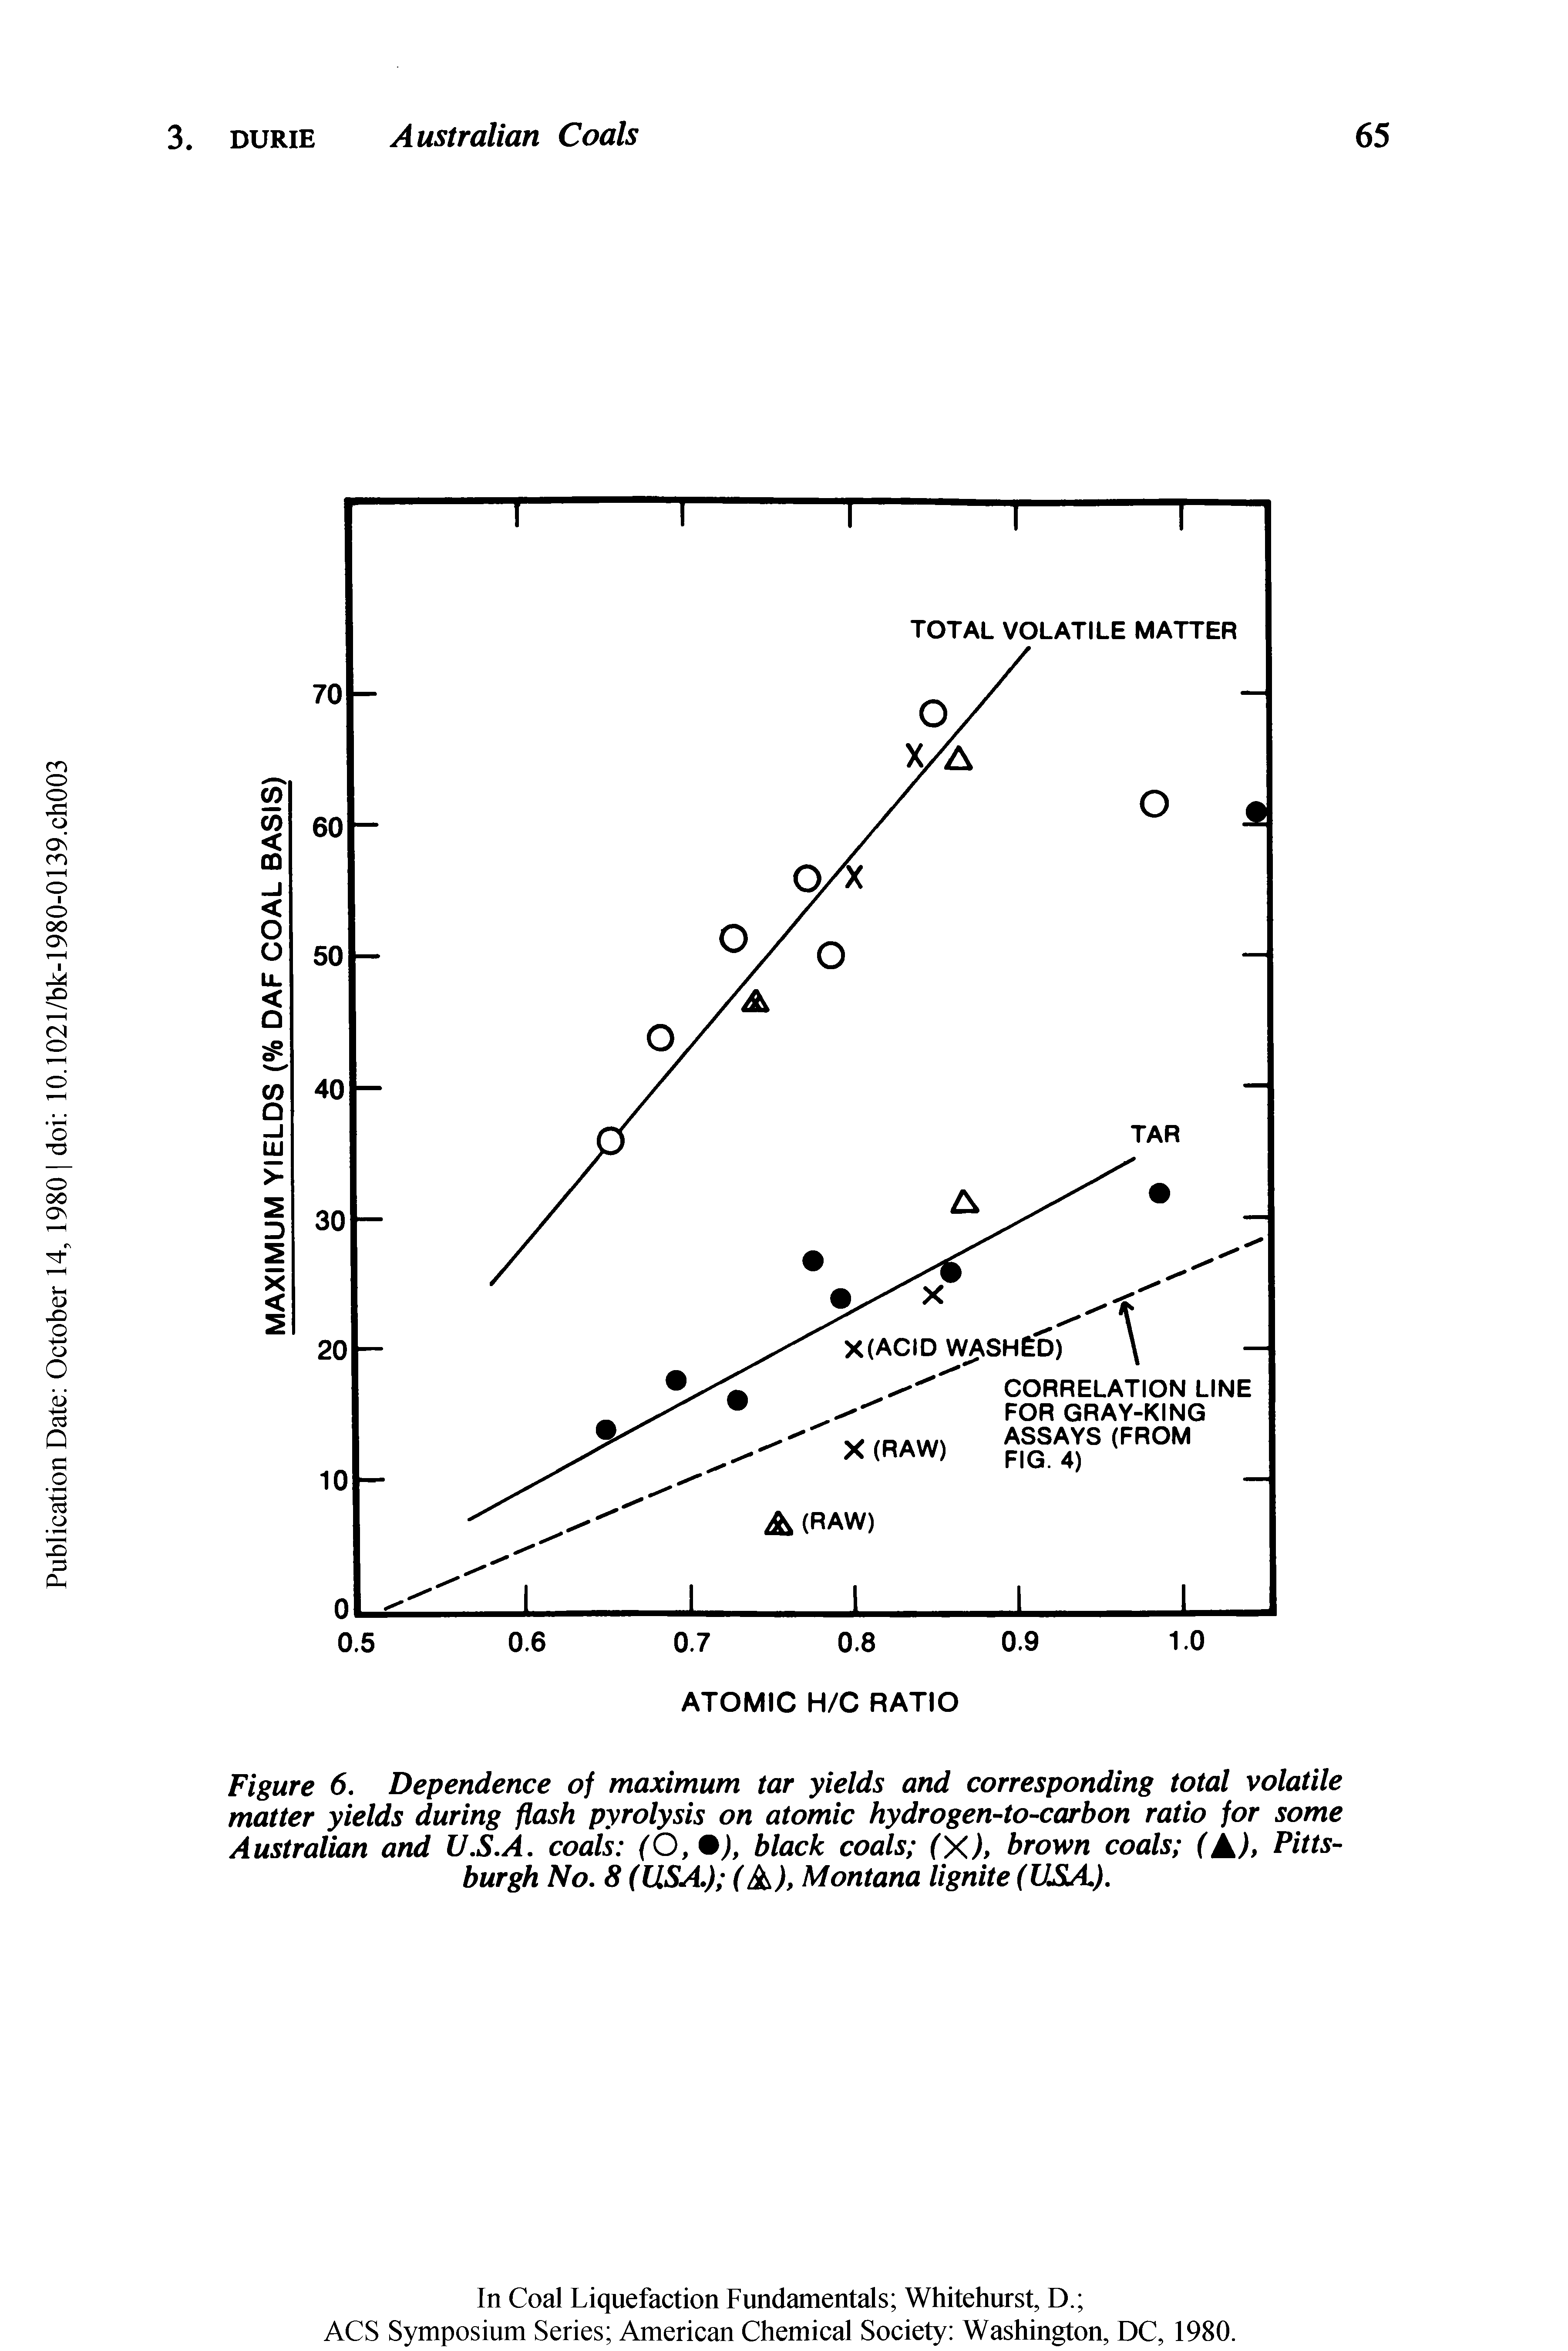 Figure 6. Dependence of maximum tar yields and corresponding total volatile matter yields during flash pyrolysis on atomic hydrogen-to-carbon ratio for some Australian and V.S.A. coals (O, 9), black coals (X), brown coals (A), Pittsburgh No. 8 (USA.) ( ), Montana lignite (USA).